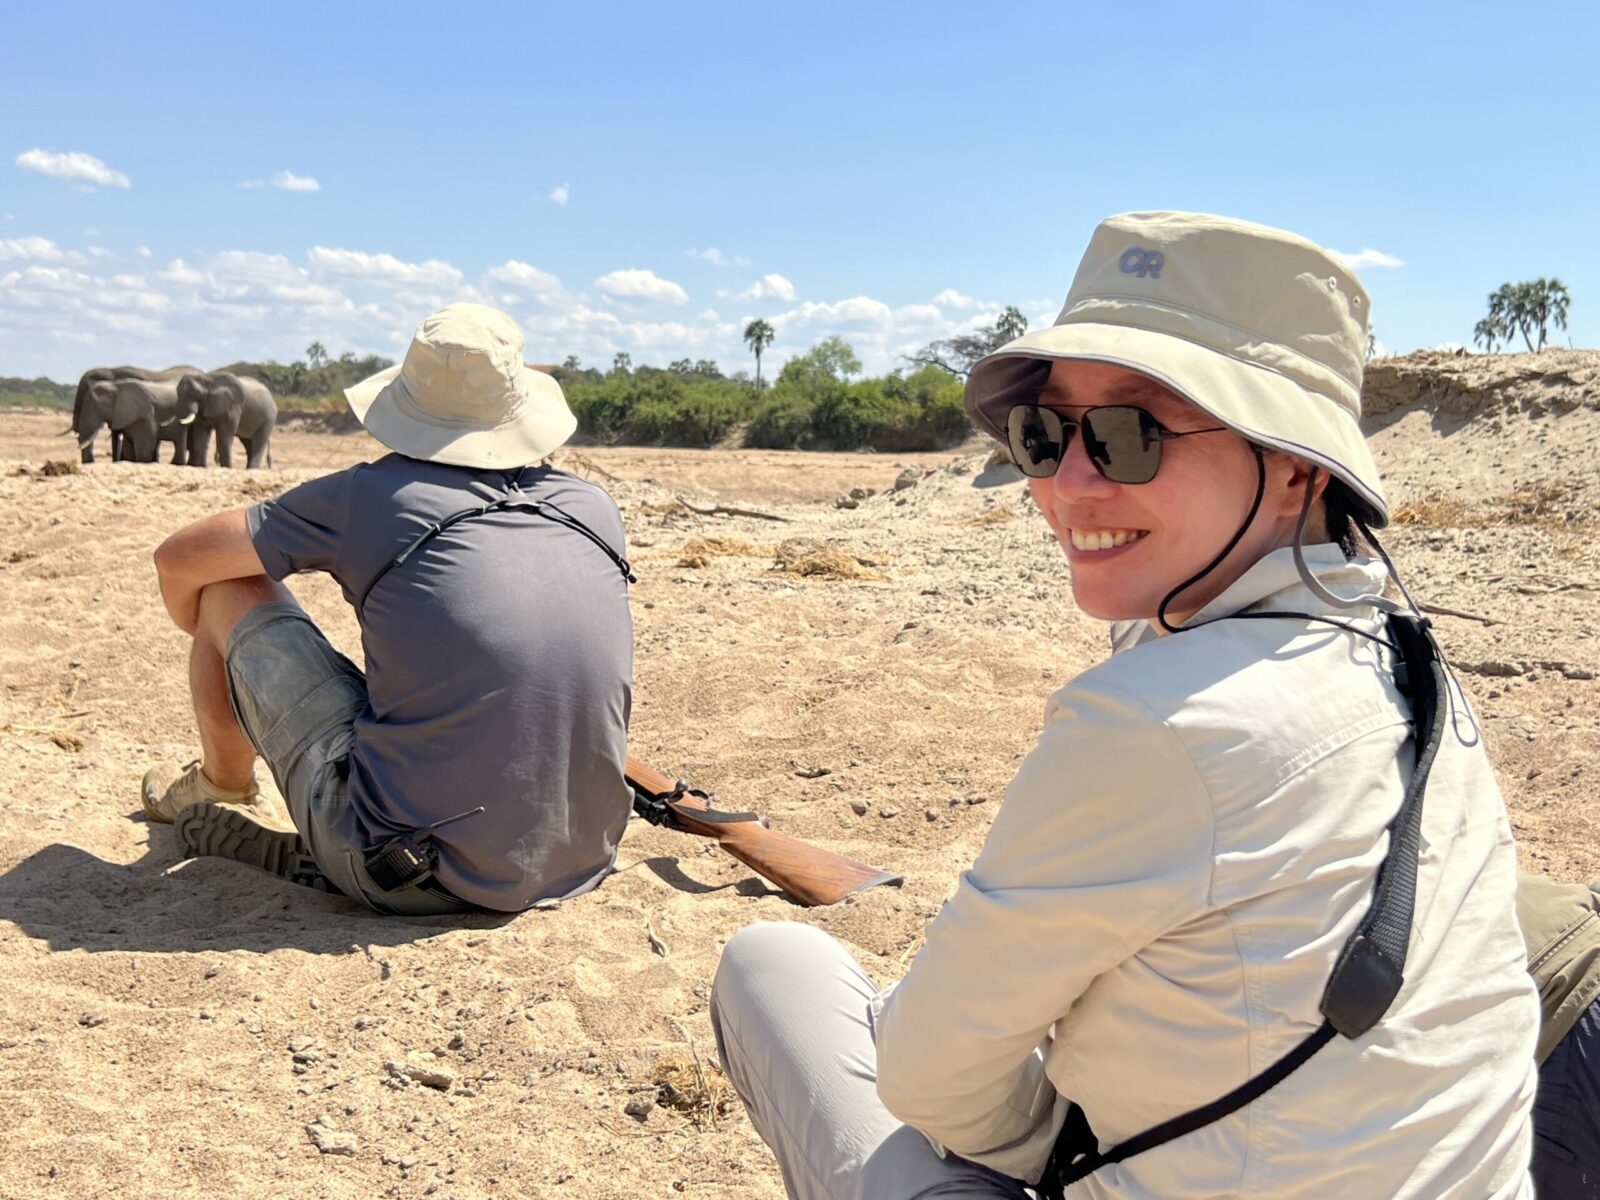 Two people watching elephants in Ruaha National Park in Tanzania.